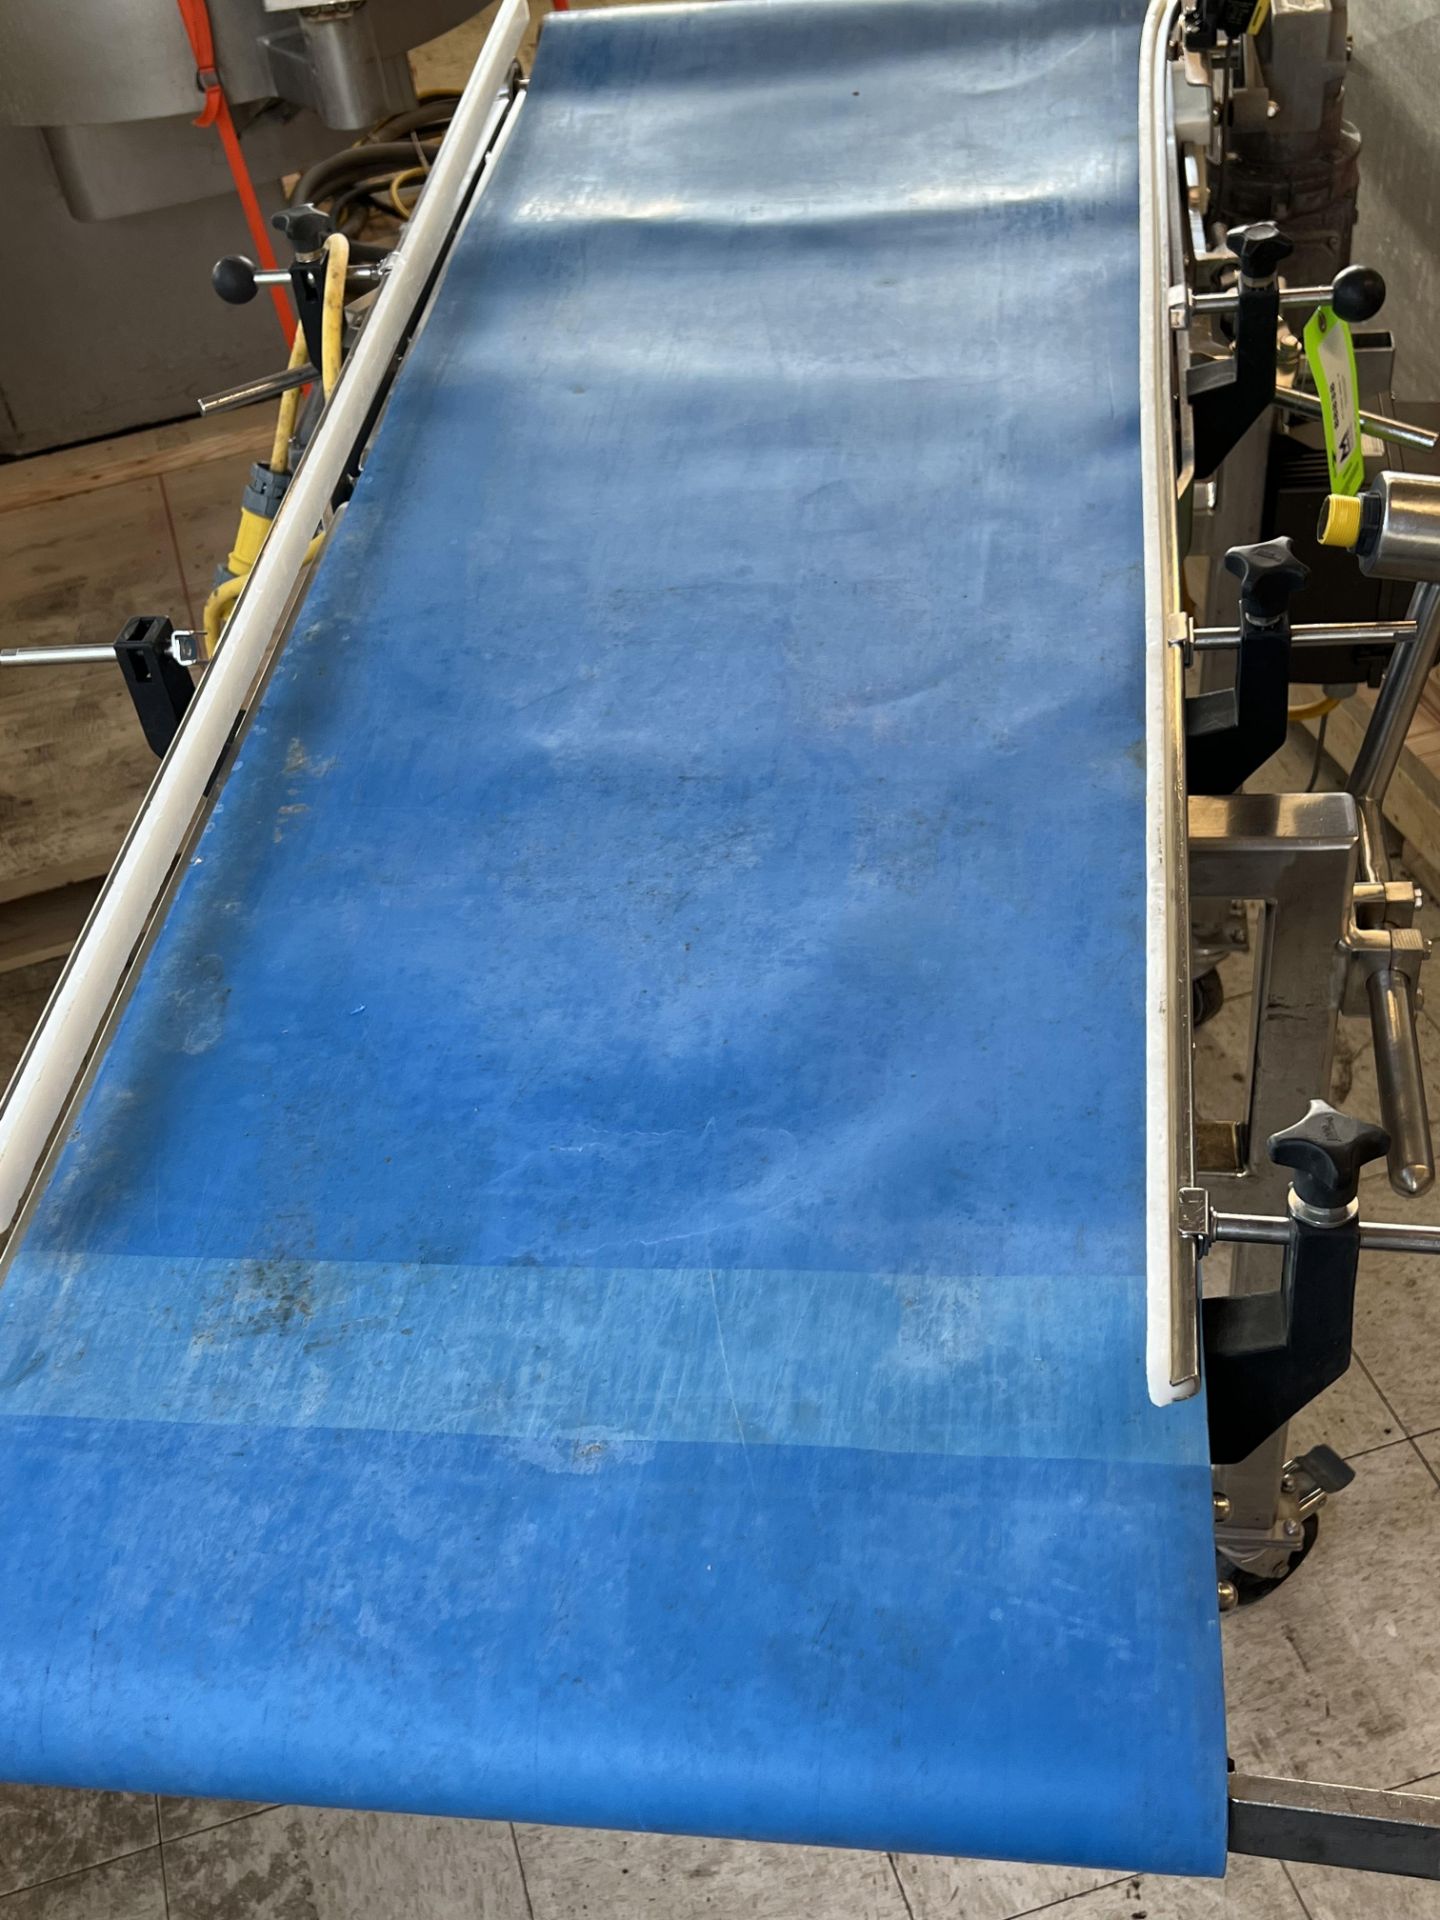 Straight Section of Conveyor, Conveyor Aprox. 75" L x 24" W Belt, x 41" H (Belt to Ground), with - Image 5 of 10